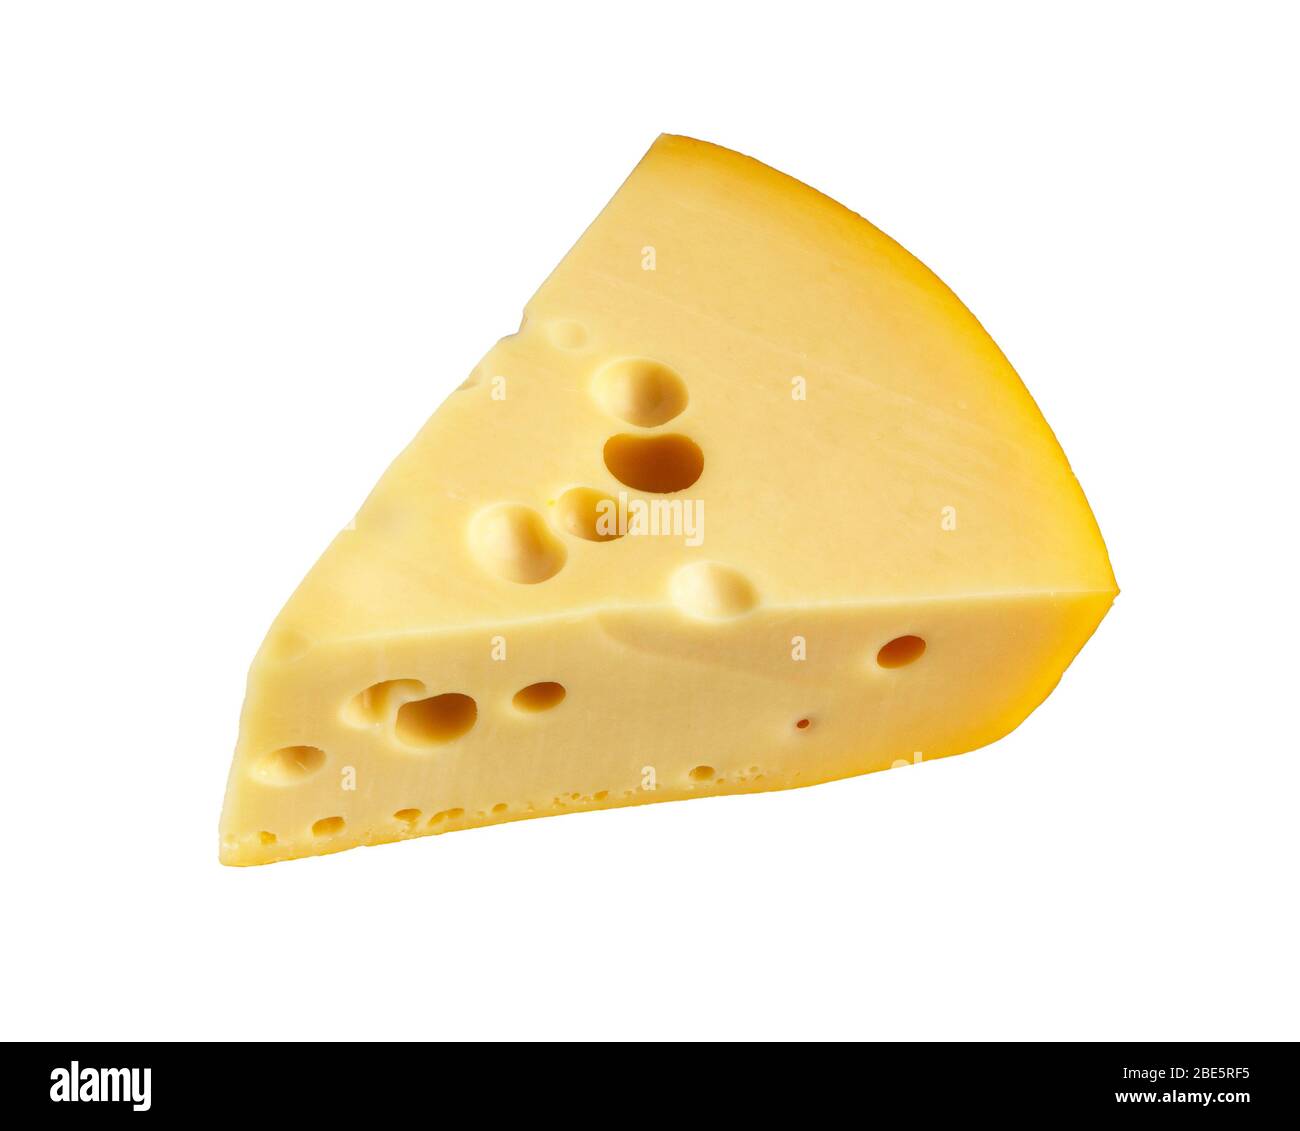 Piece of cheese isolated on white background. Cheese with holes. Stock Photo